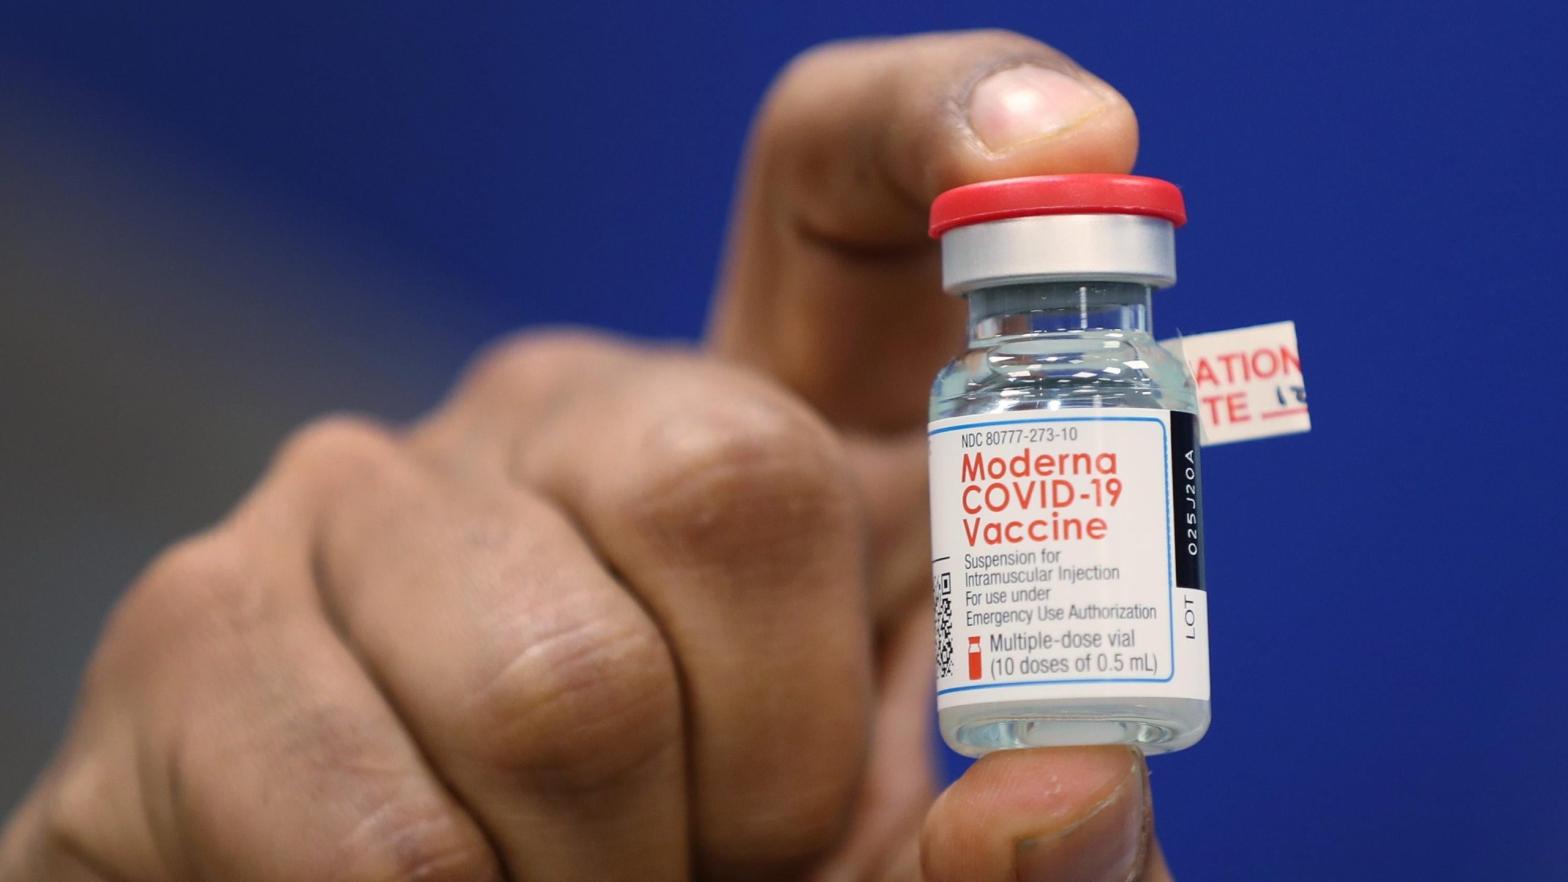 A bottle of the Moderna covid-19 vaccine.  (Photo: Joe Raedle, Getty Images)